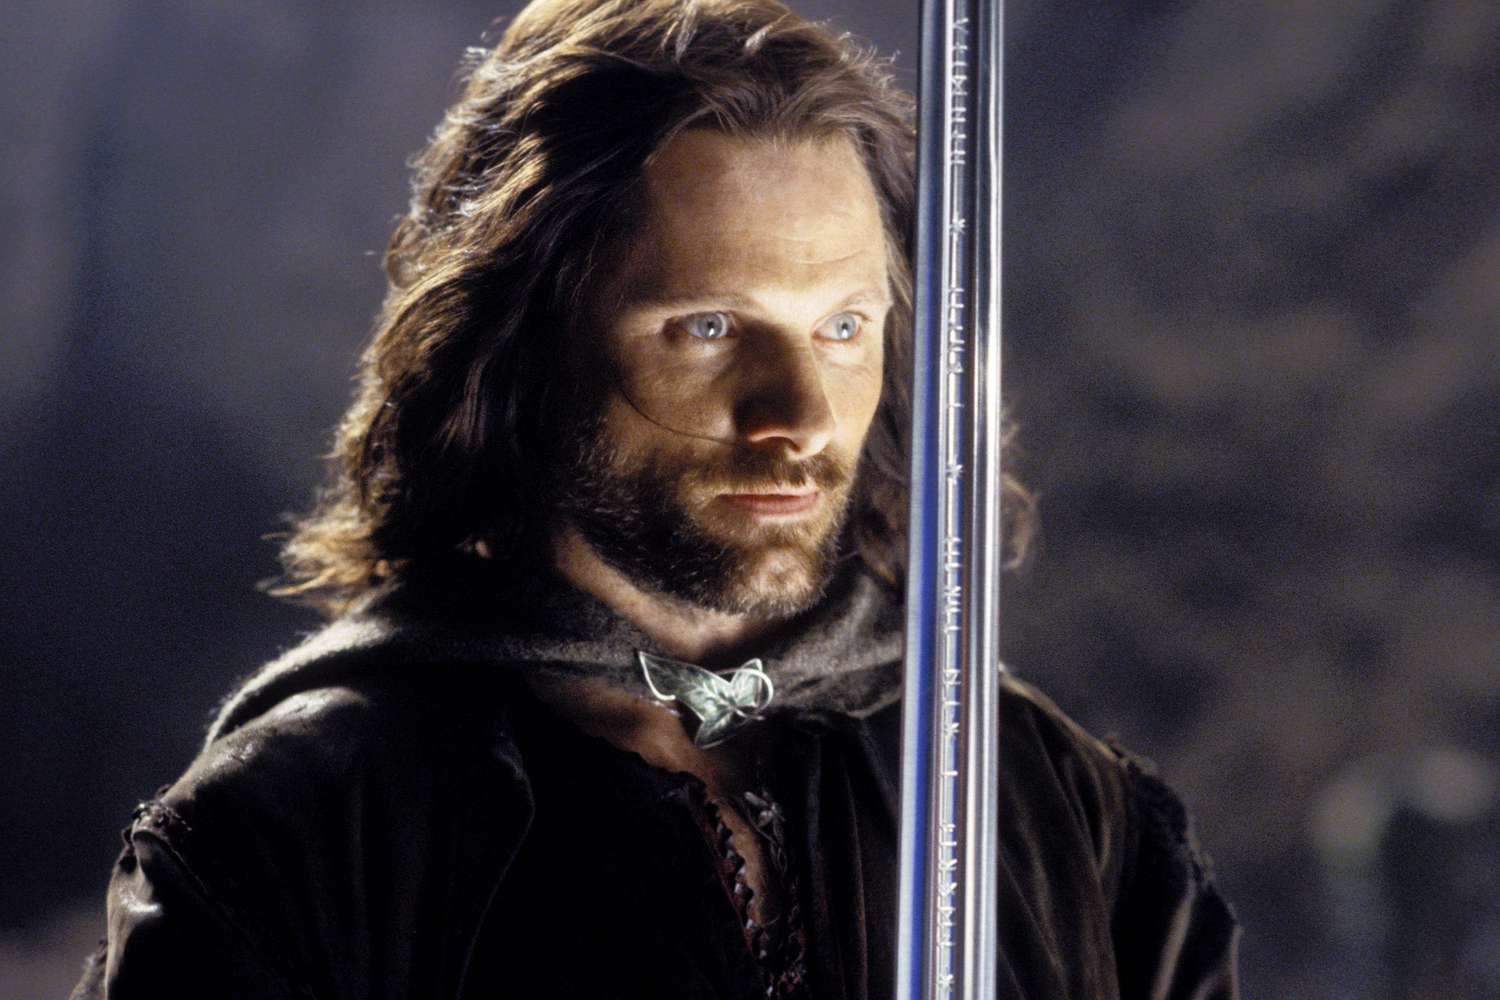 Lord of the Rings: The Return of the King (2003)Viggo Mortensen